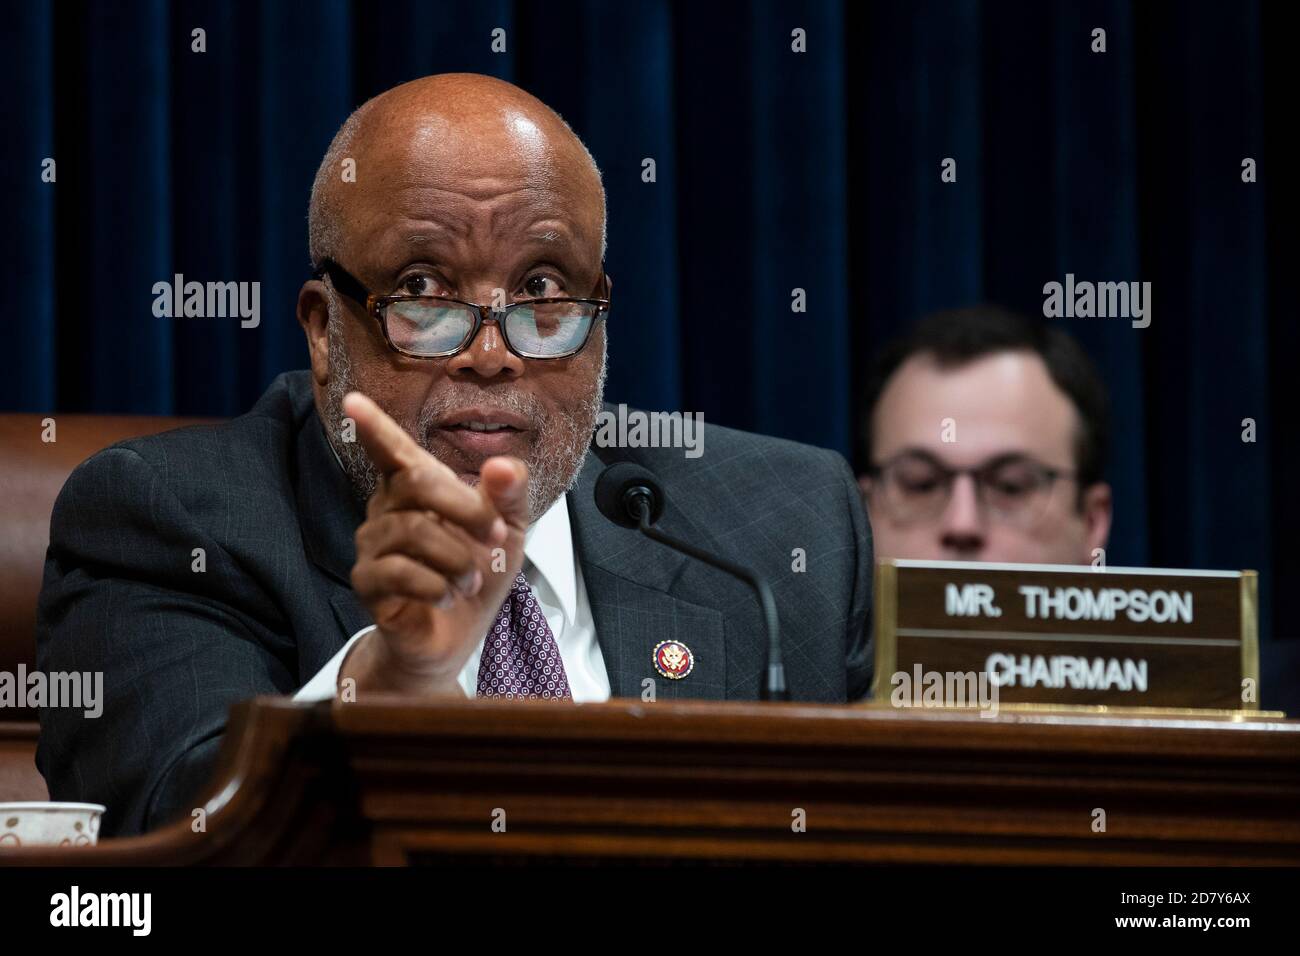 Representative Bennie Thompson, a Democrat from Mississippi and Chairman of the House Homeland Security Committee, moderates a tense exchange between Representative Lauren Underwood, a Democrat from Illinois, and acting Department of Homeland Security Secretary Kevin McAleenan as he testifies before the House of Representatives Committee on Homeland Security during a budget oversight hearing on Wednesday, May 22, 2019 on Capitol Hill in Washington, D.C. McAleenan answered questions from committee Democrats about the death of 5 migrant children on the Souther U.S. border. Committee Republicans Stock Photo